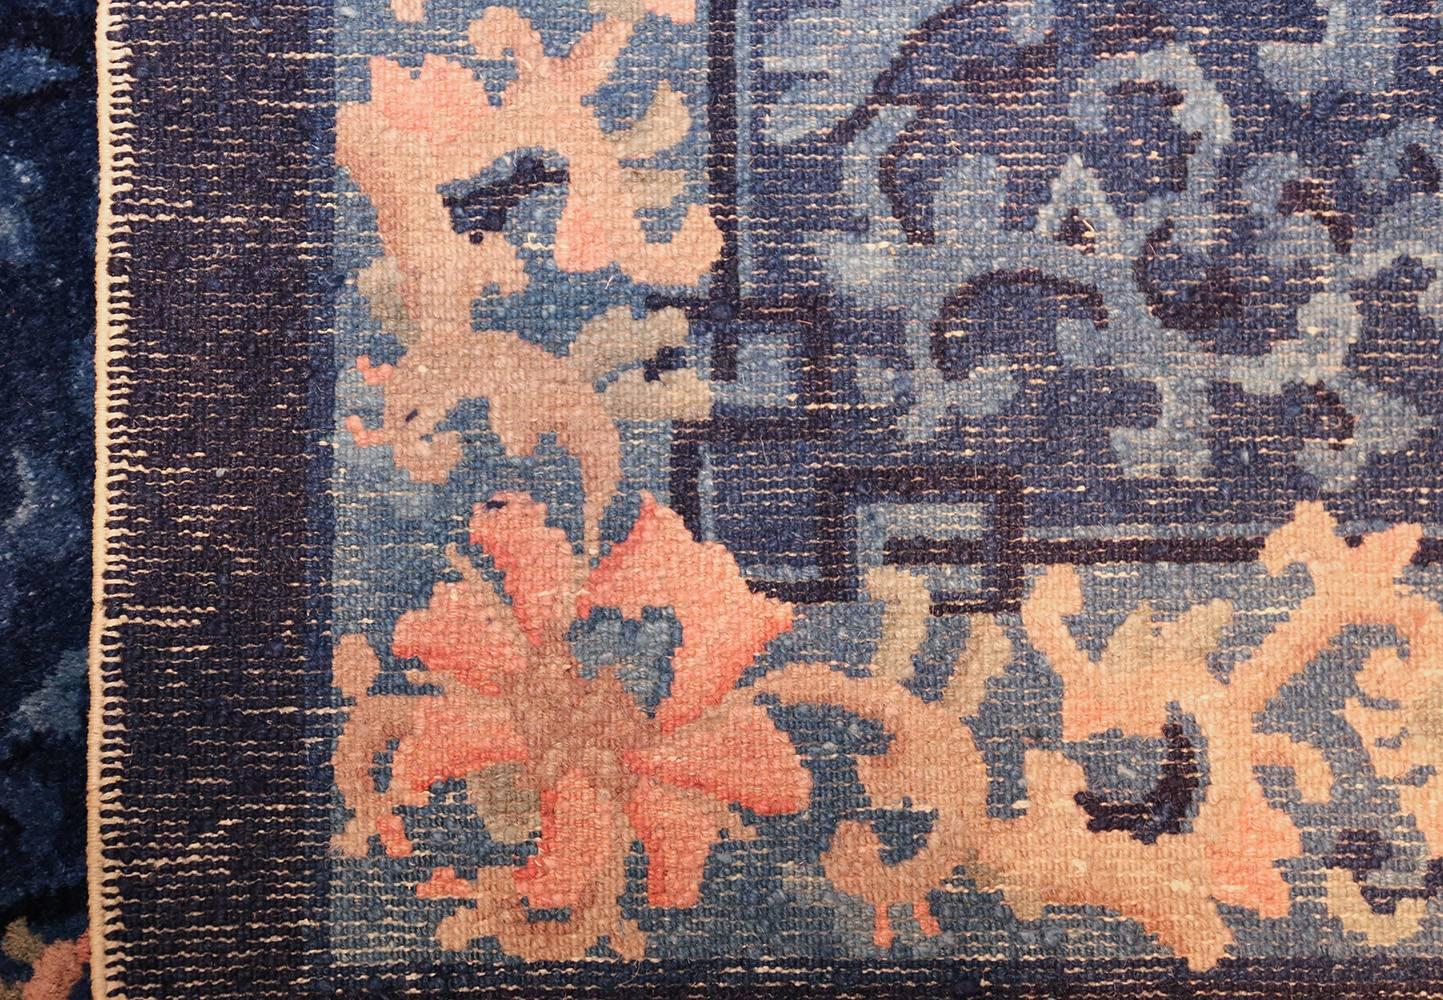 20th Century Pair of Blue Antique Chinese Rugs. Size: 2 ft 5 in x 4 ft 4 in (0.74 m x 1.32 m)